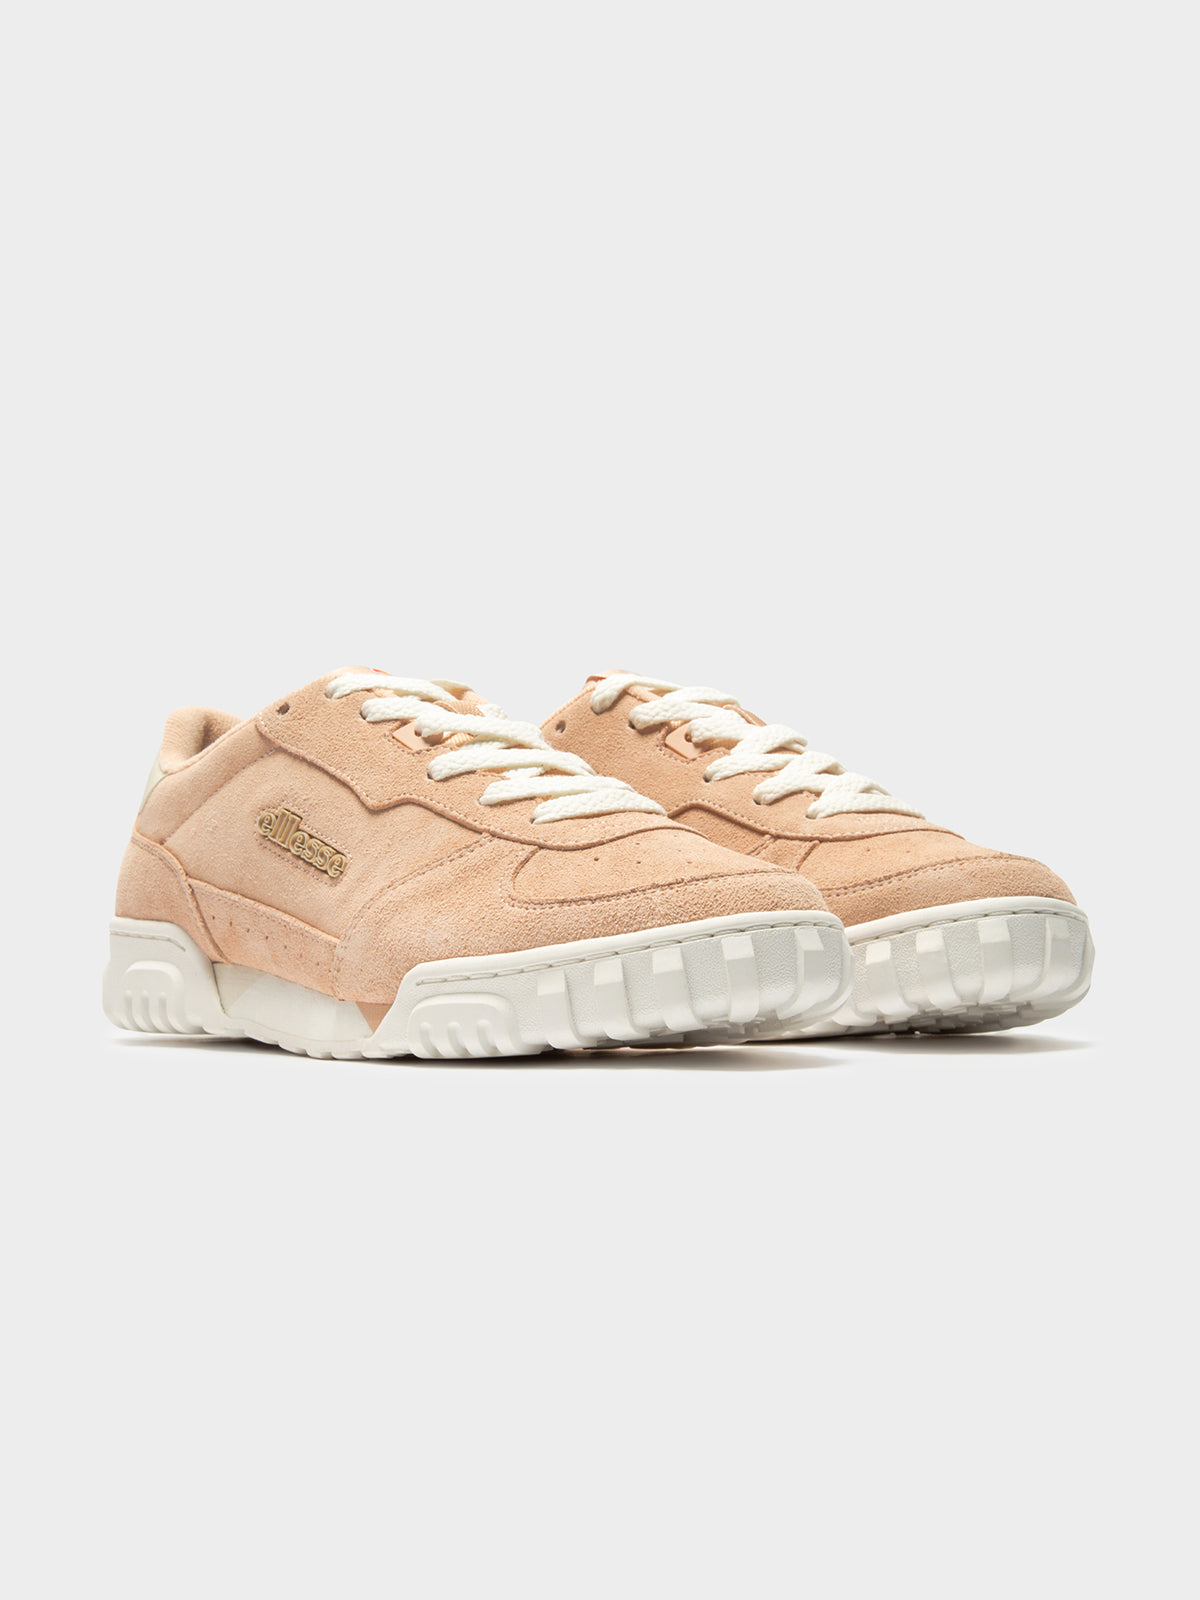 Womens Lo Tanker Sneakers in Natural Suede